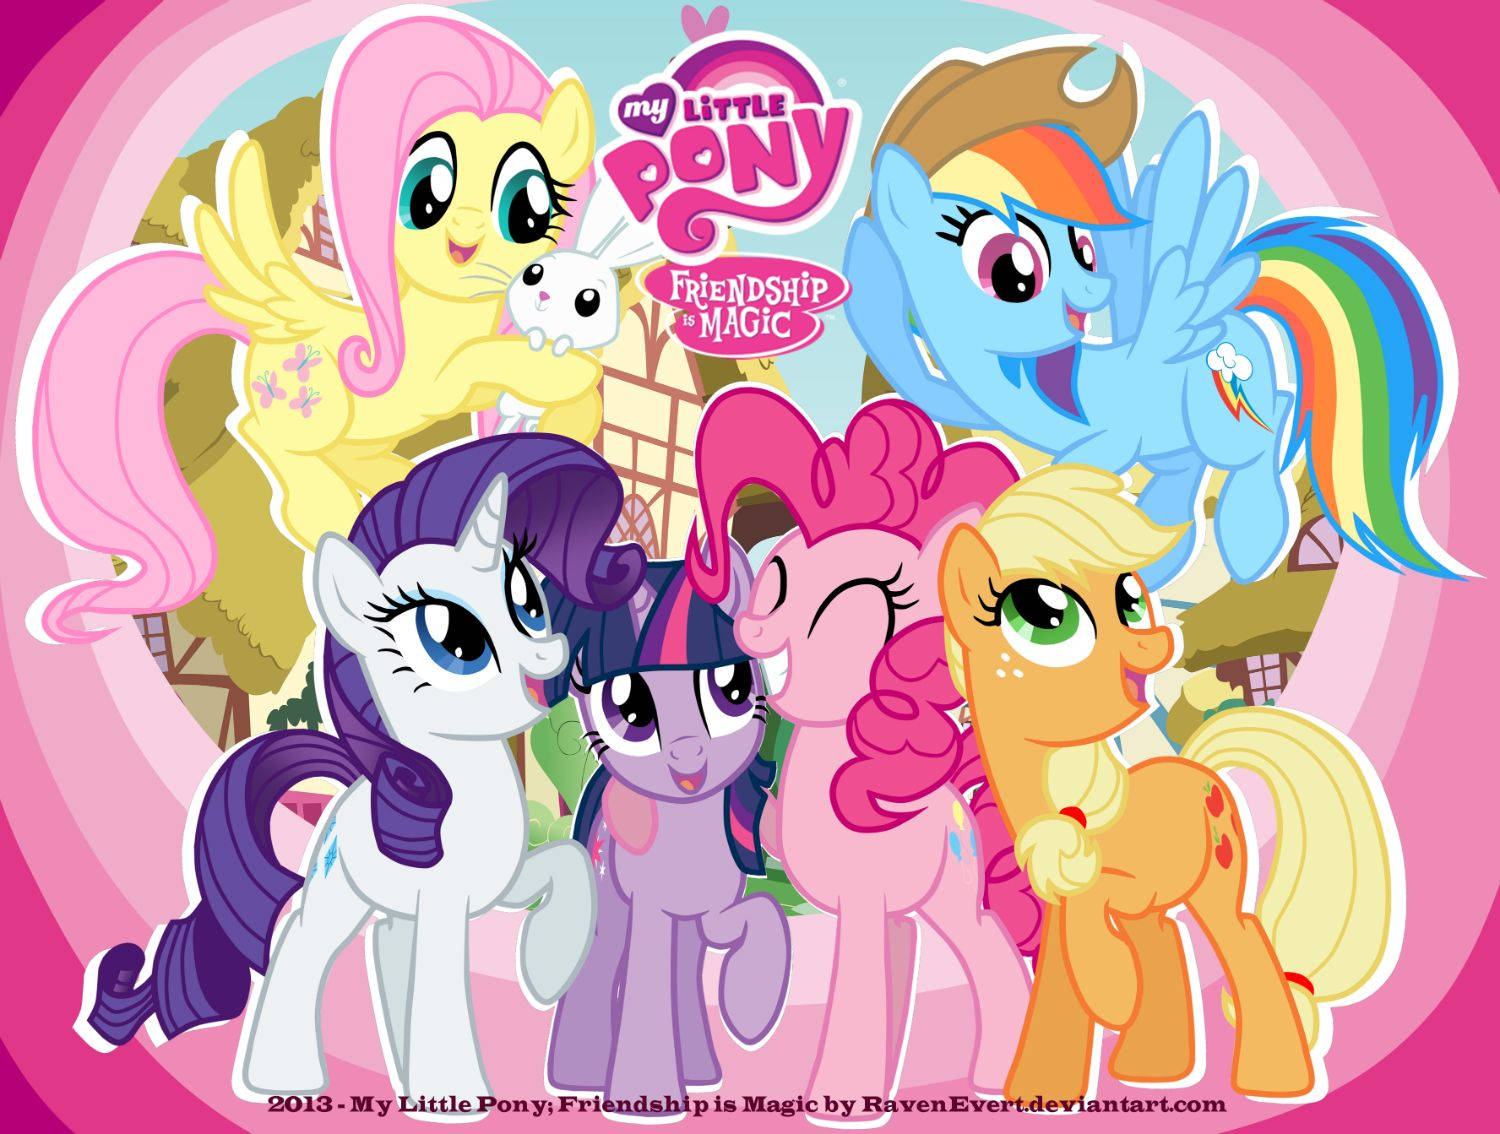 Movie Poster Of My Little Pony